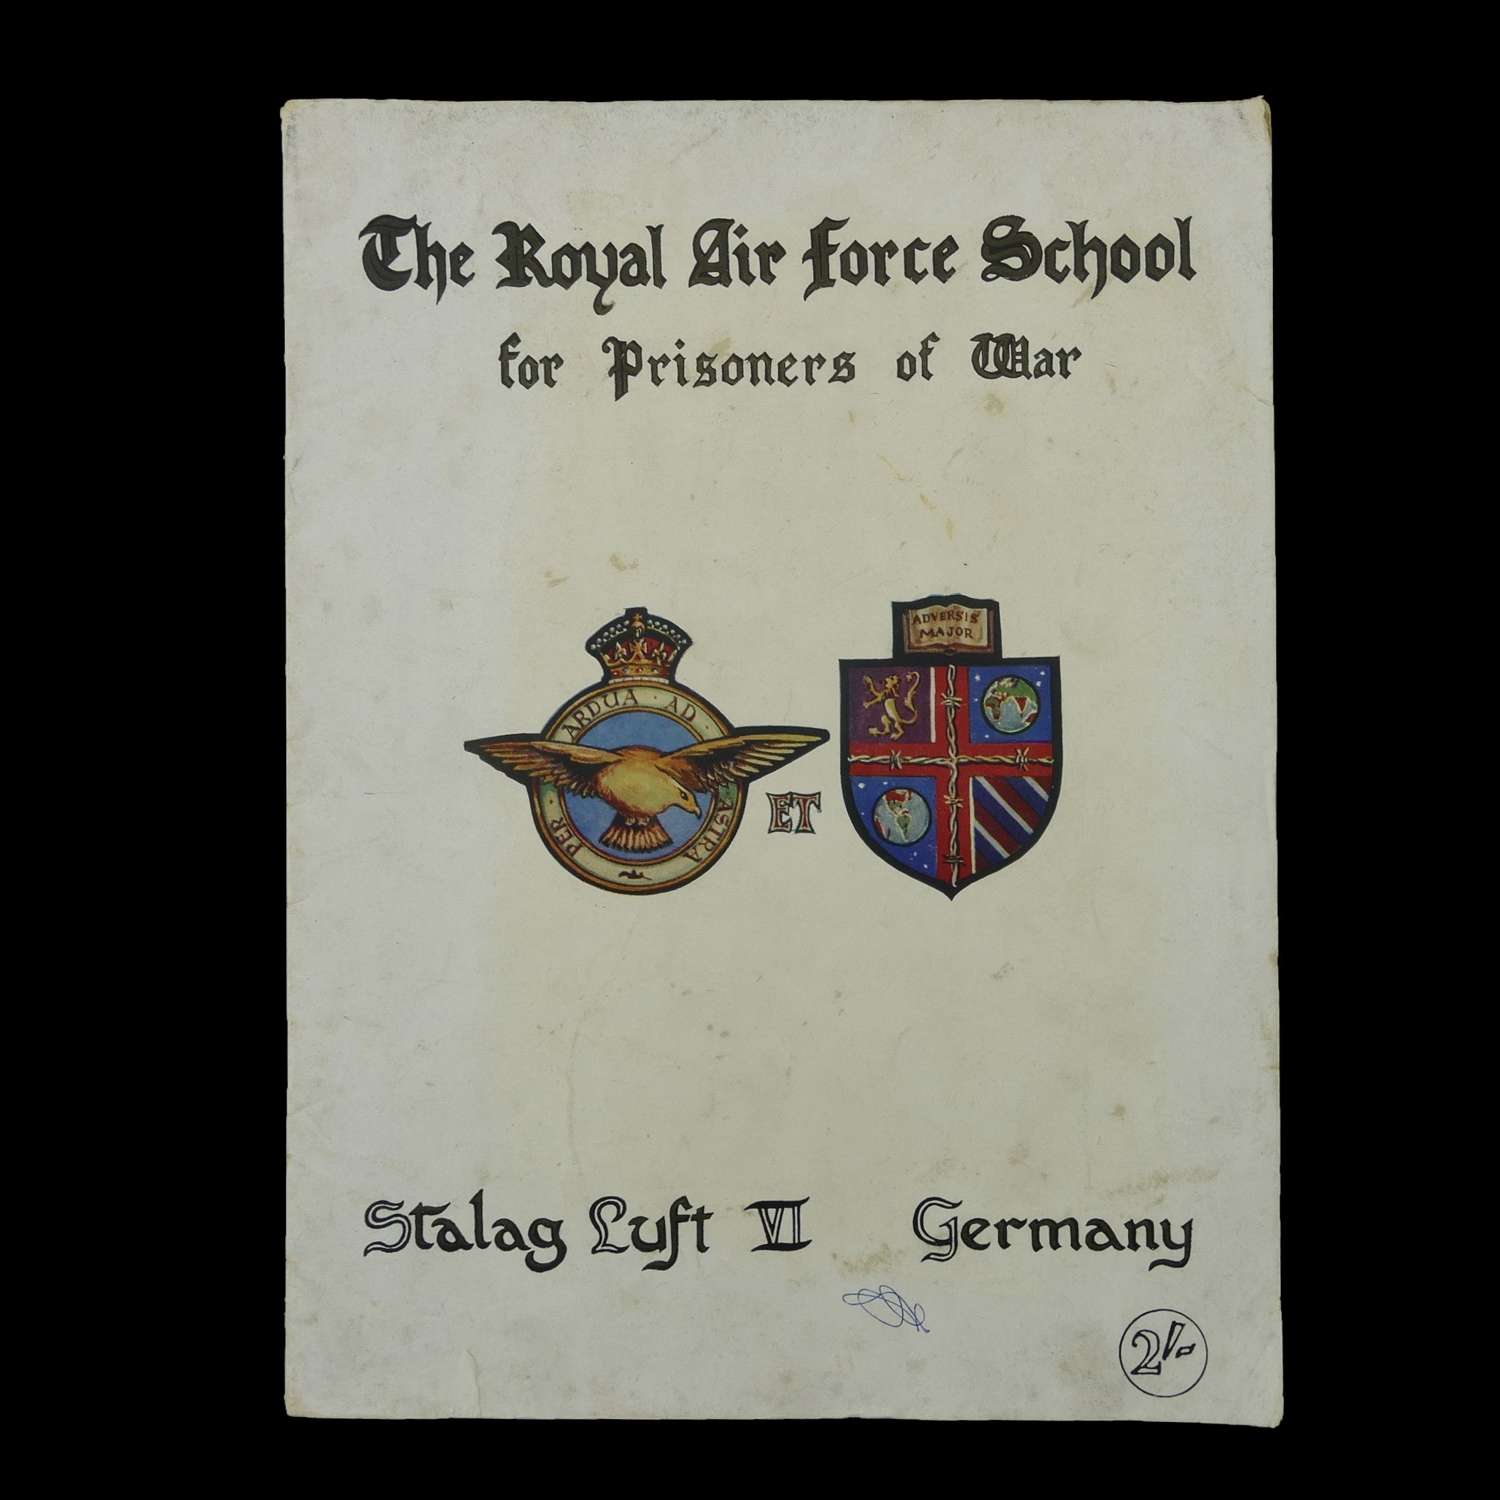 The Royal Air Force School for Prisoners of War